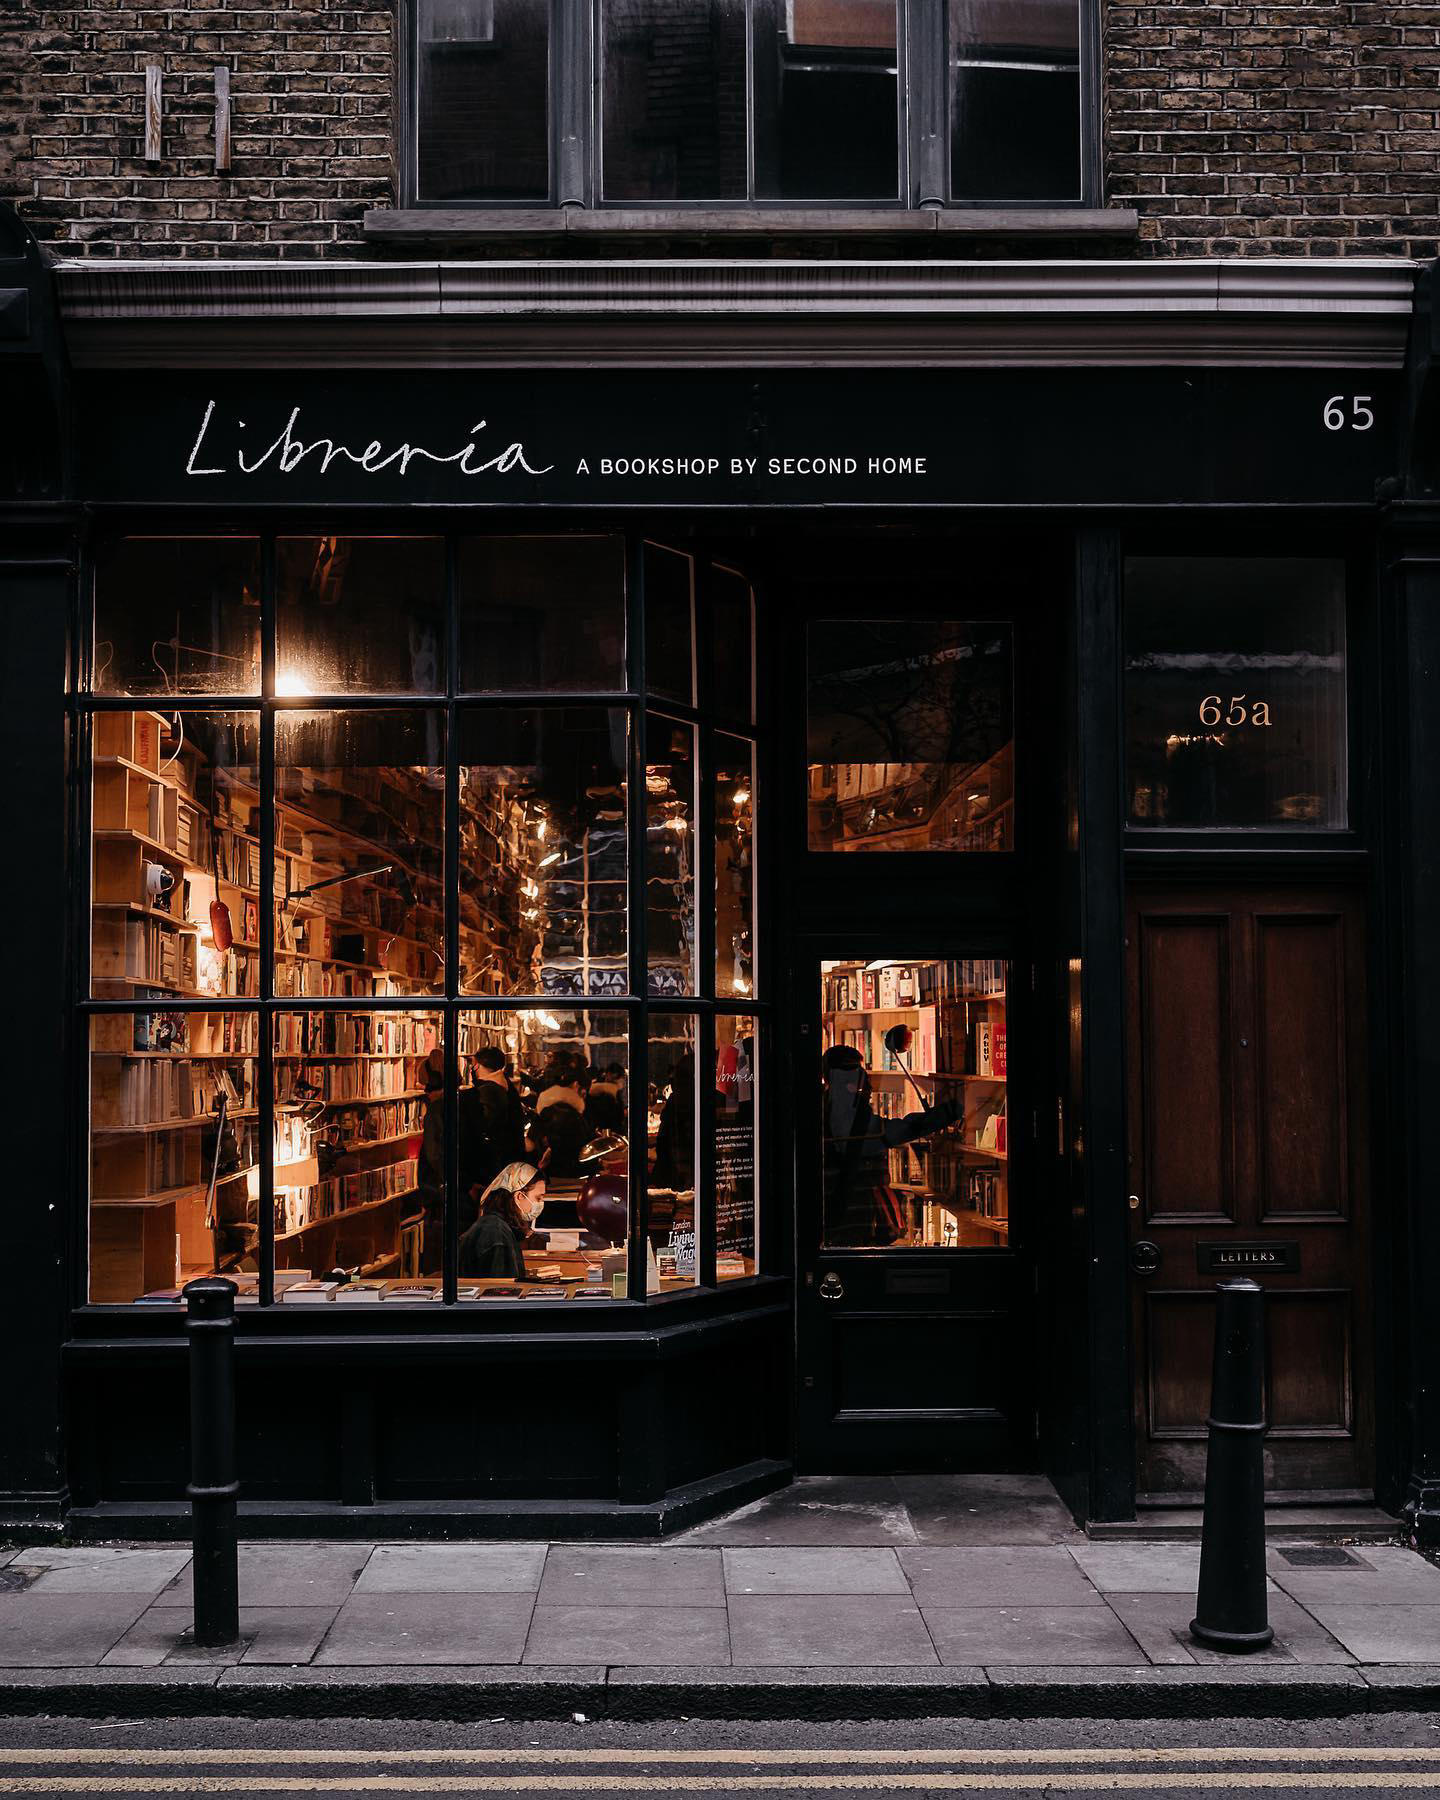 image  1 Jacintha Verdegaal - Impossible to find a London bookshop like this one and not go in